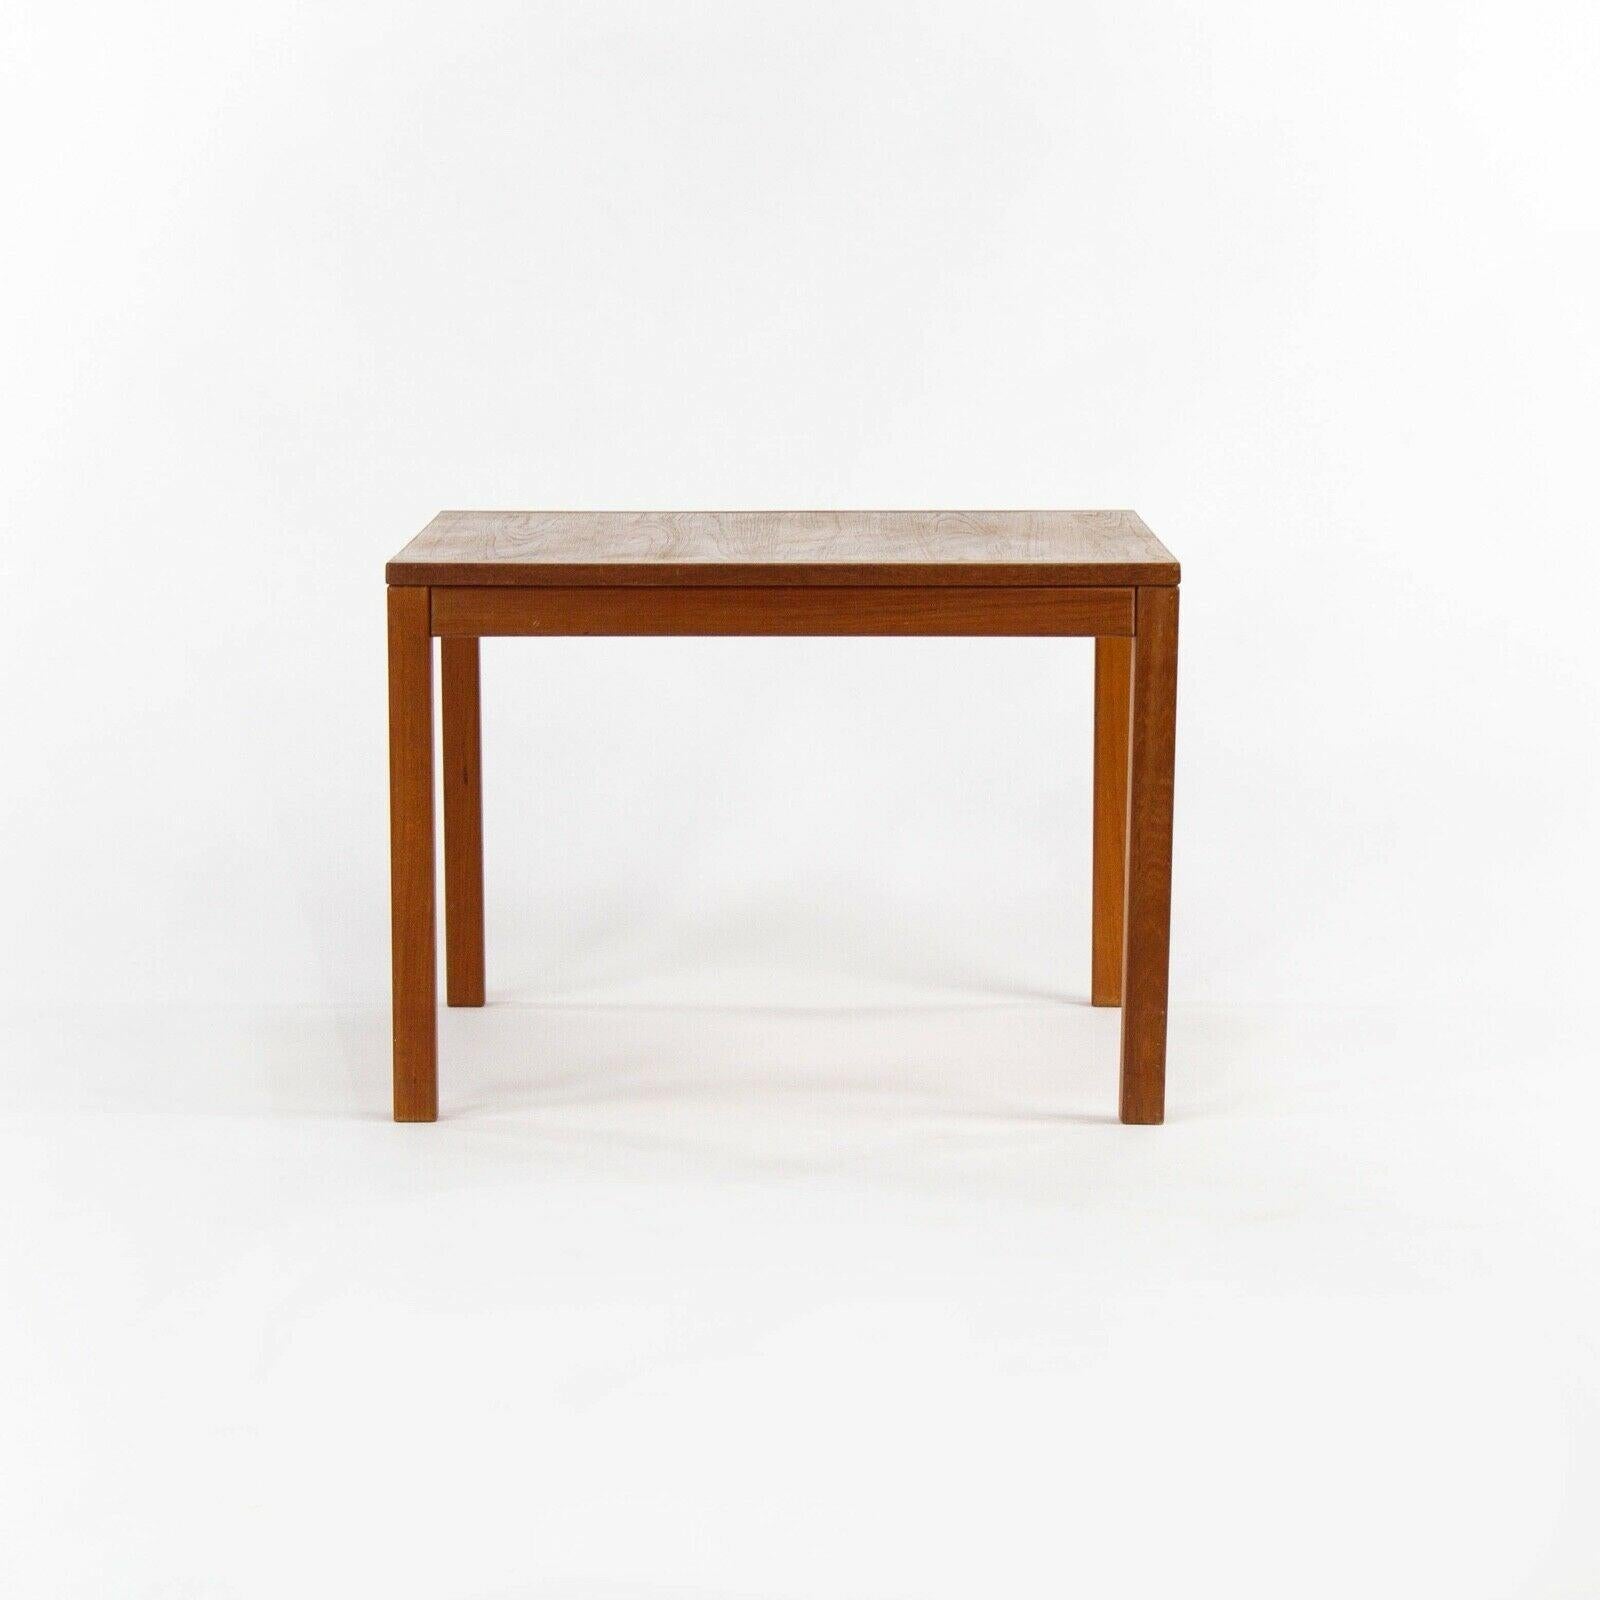 Listed for sale is a minimal danish end table, designed by Henning Kjaernulf for Vejle Stole & Mobelfabrik. The manufacturer Vejle Stole & Mobelfabrik was based in Vejle, Denmark and was crafting furniture since 1894. Between then and its closing in